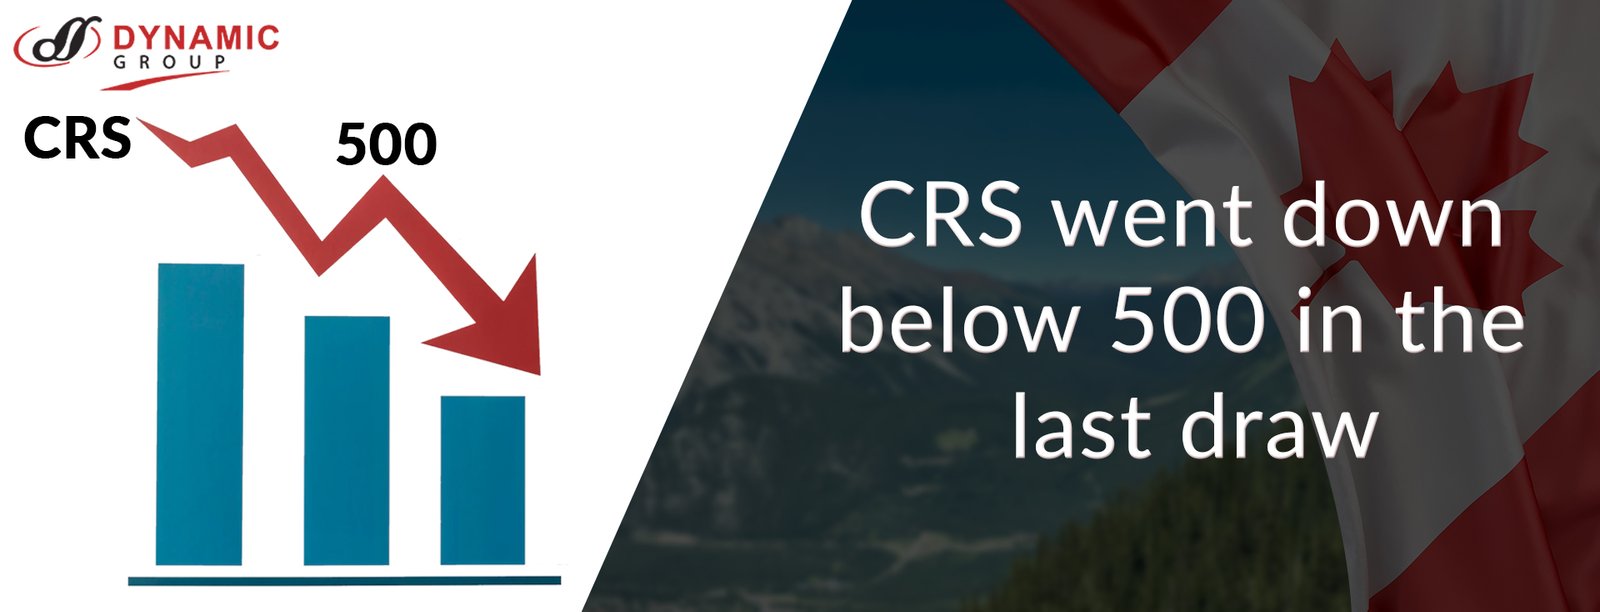 Good news, CRS went down below 500 in the last draw